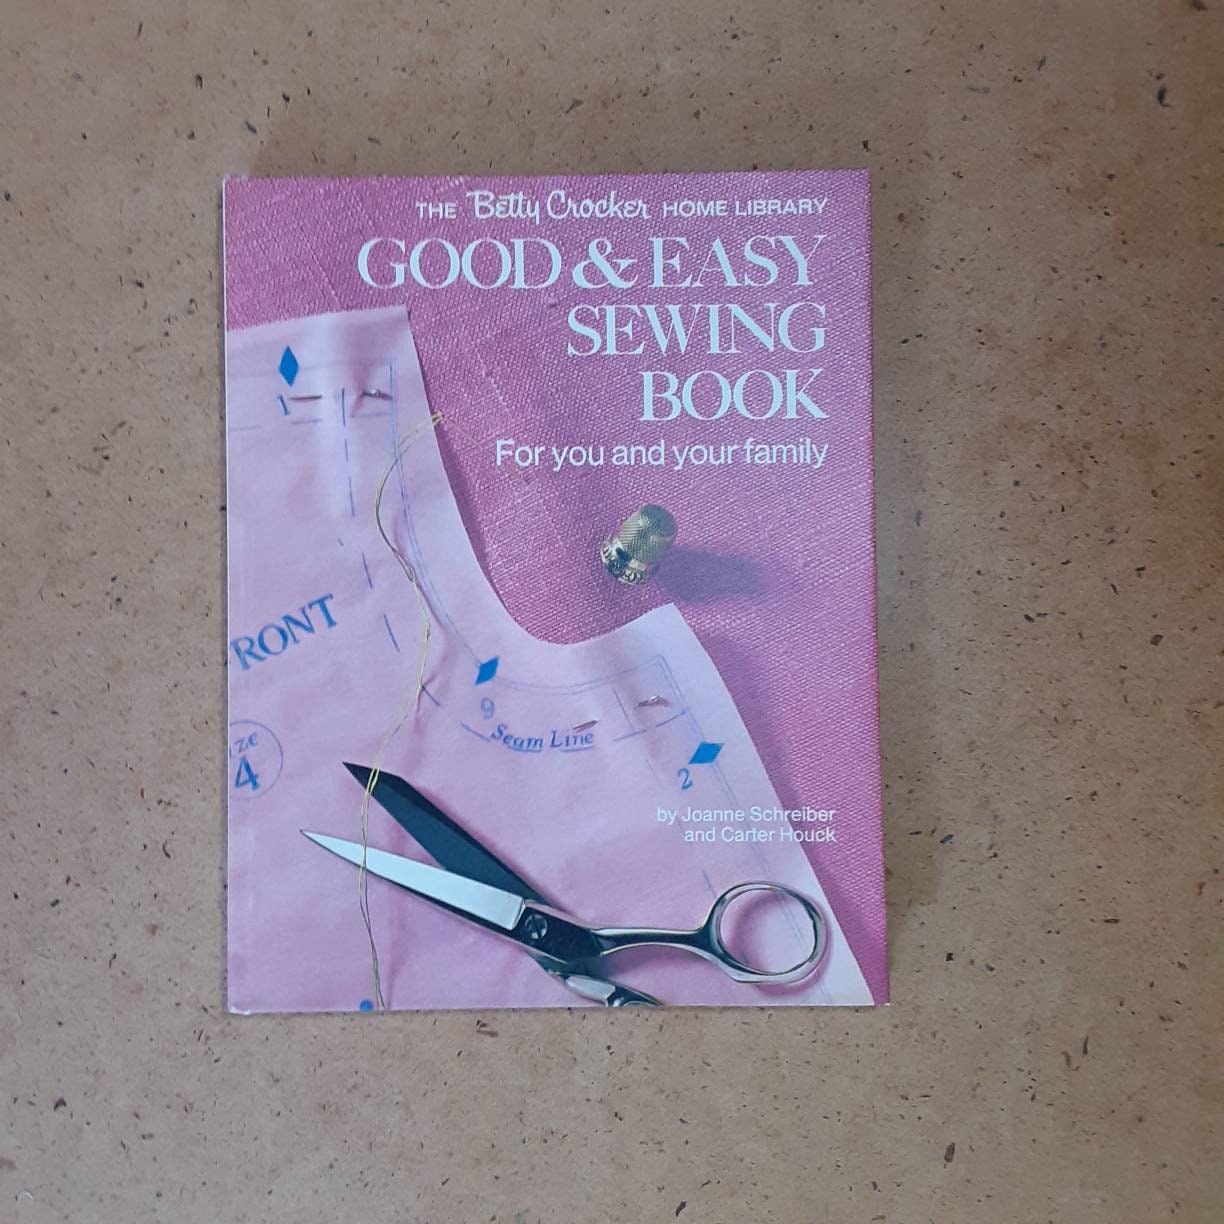 Vintage Good & Easy Sewing Book, 1972 Betty Crocker's Library Large  Hardcover First Edition Guide to Dressmaking Tailoring Clothing Design 